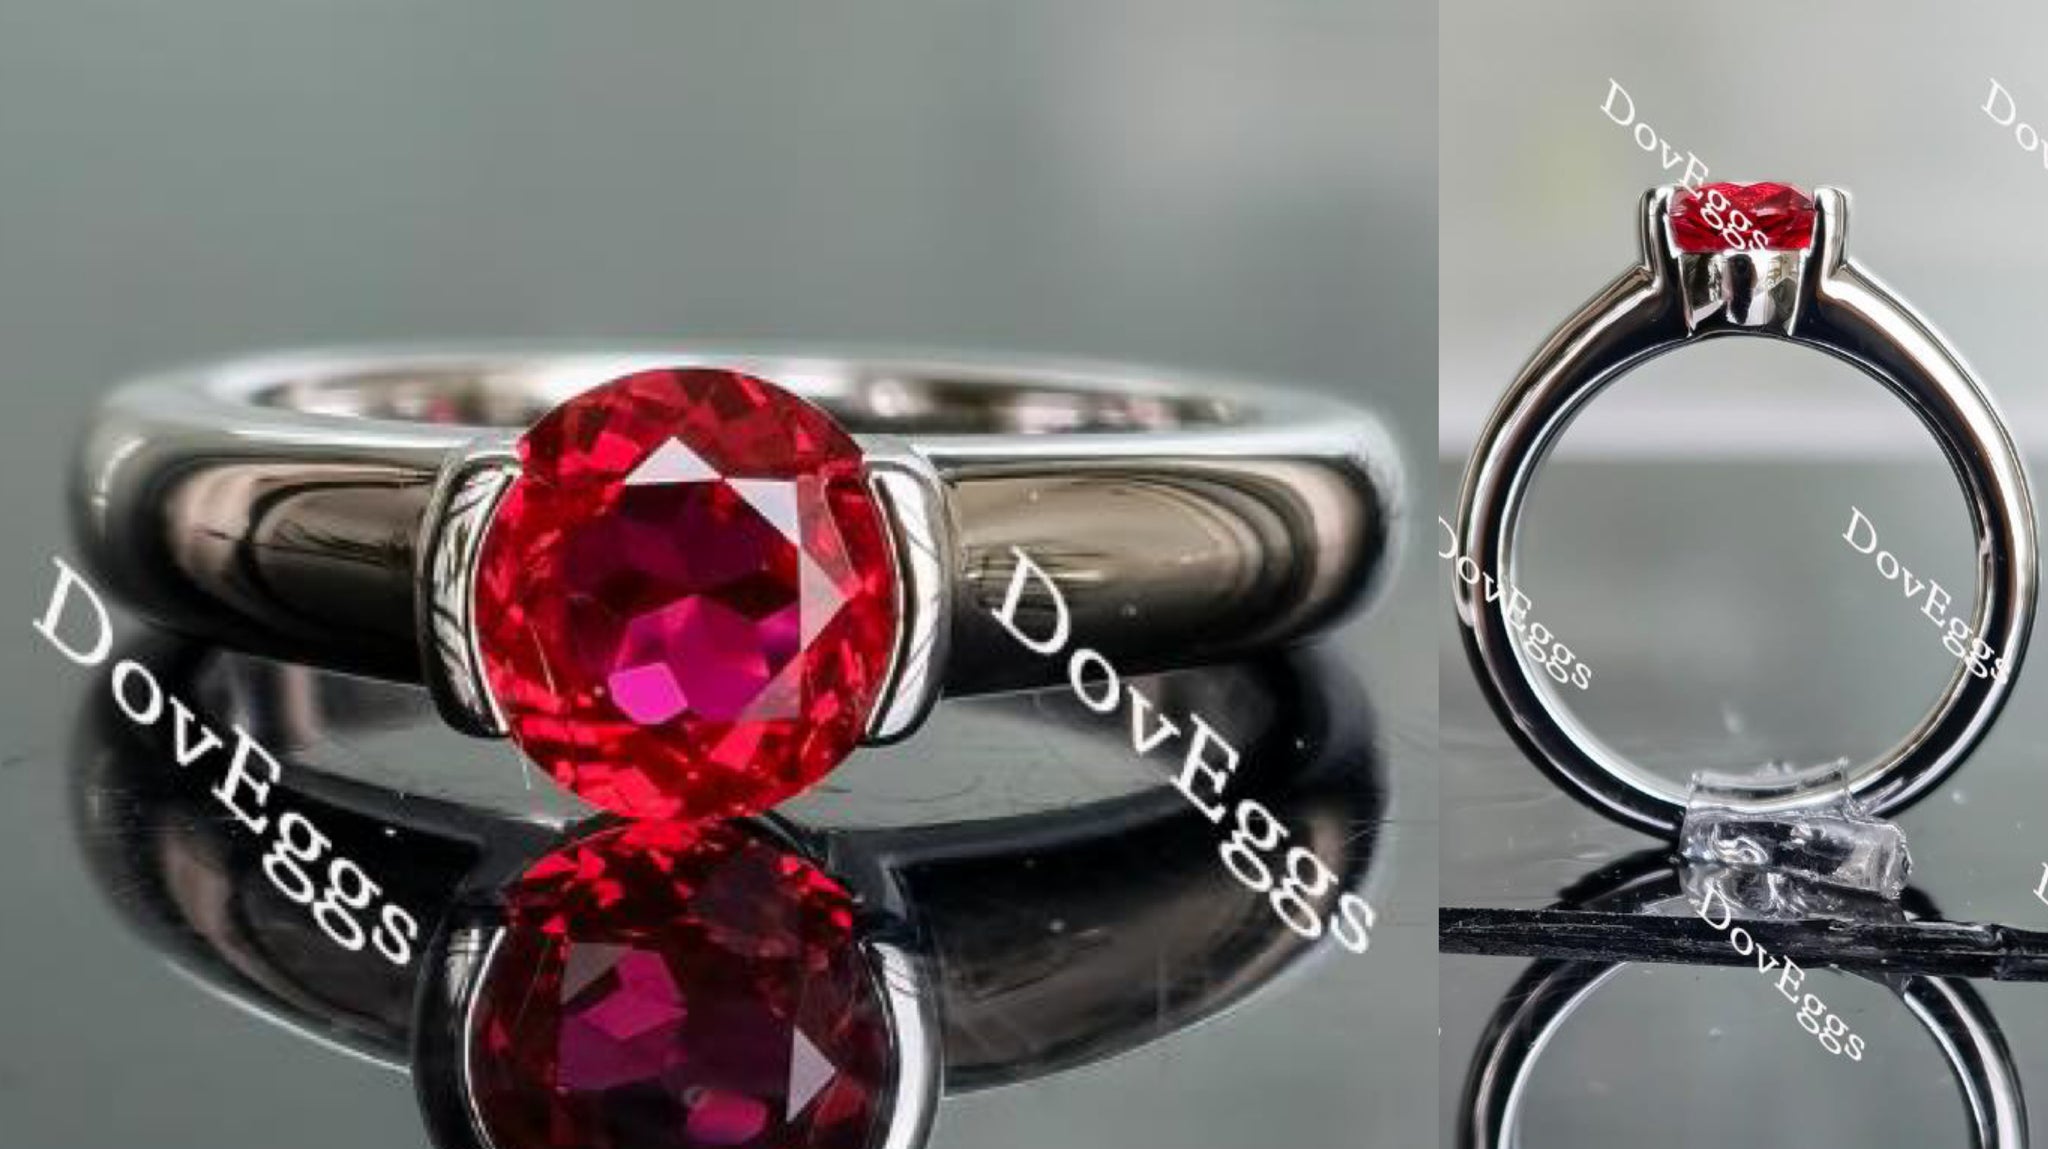 Doveggs round solitaire vivid pegion blood ruby colored gem engagement ring